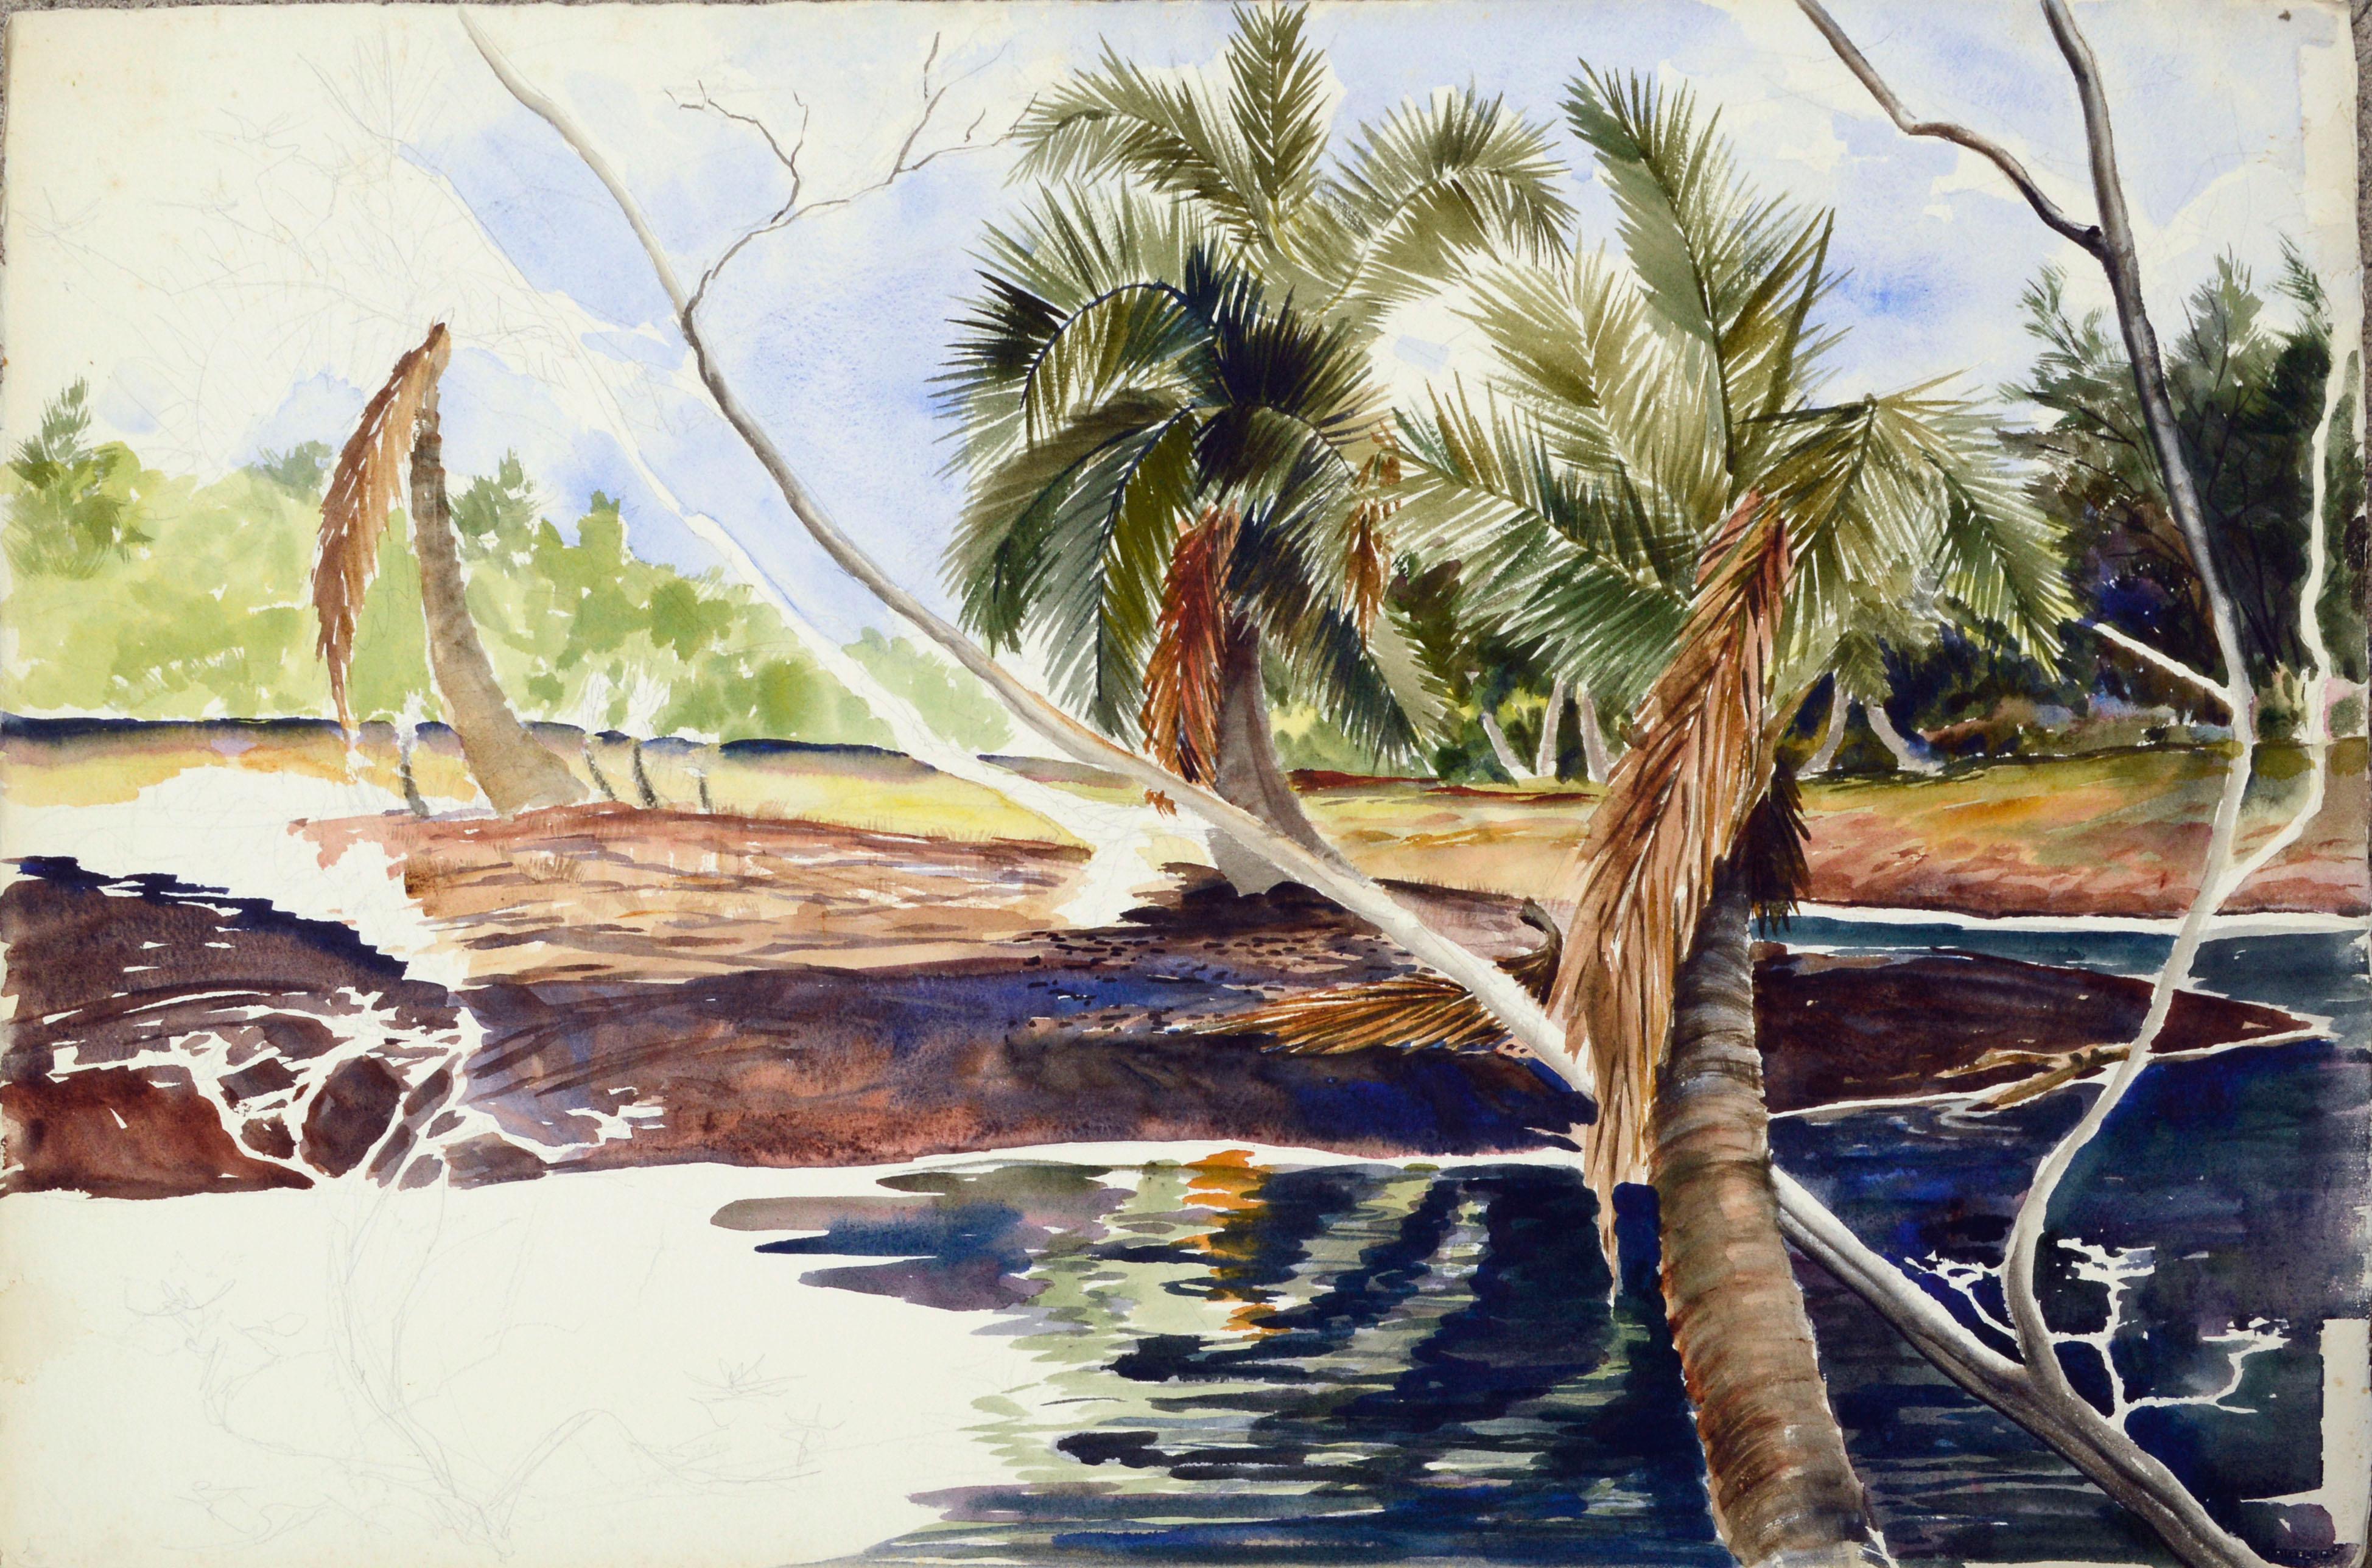 Joseph Yeager Landscape Art - Tropical Palms (unfinished work)